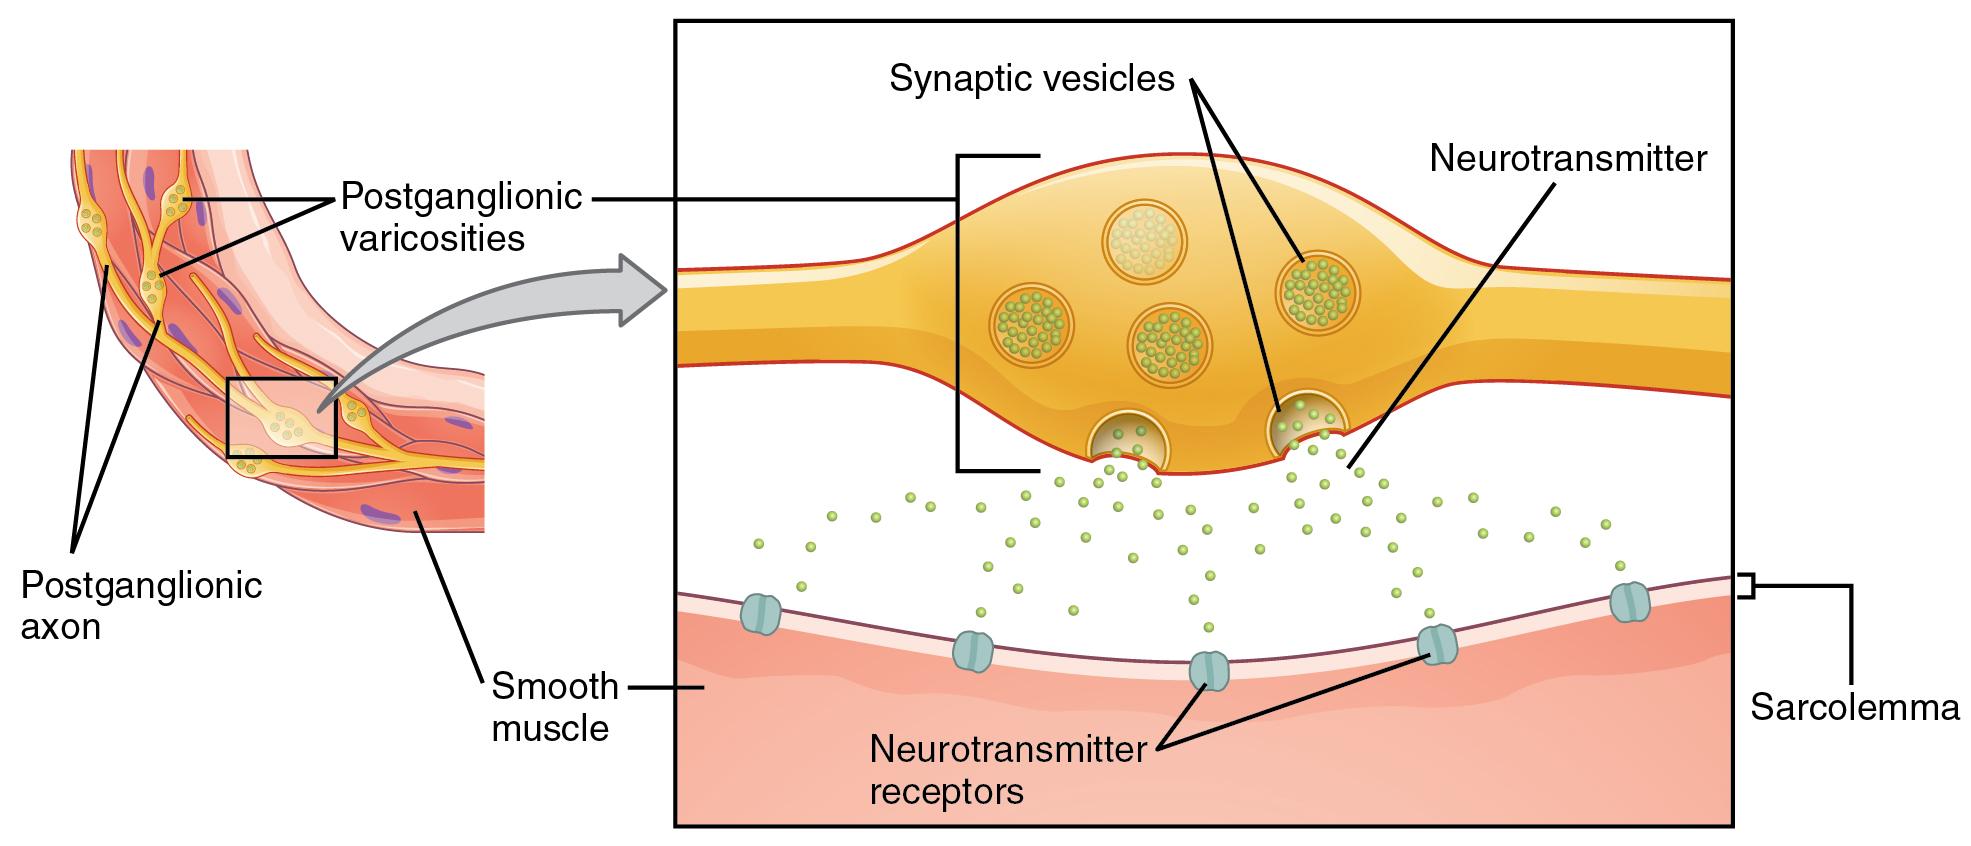 A nerve presents an enlargement with circles inside representing vesicles with neurotransmitters. 